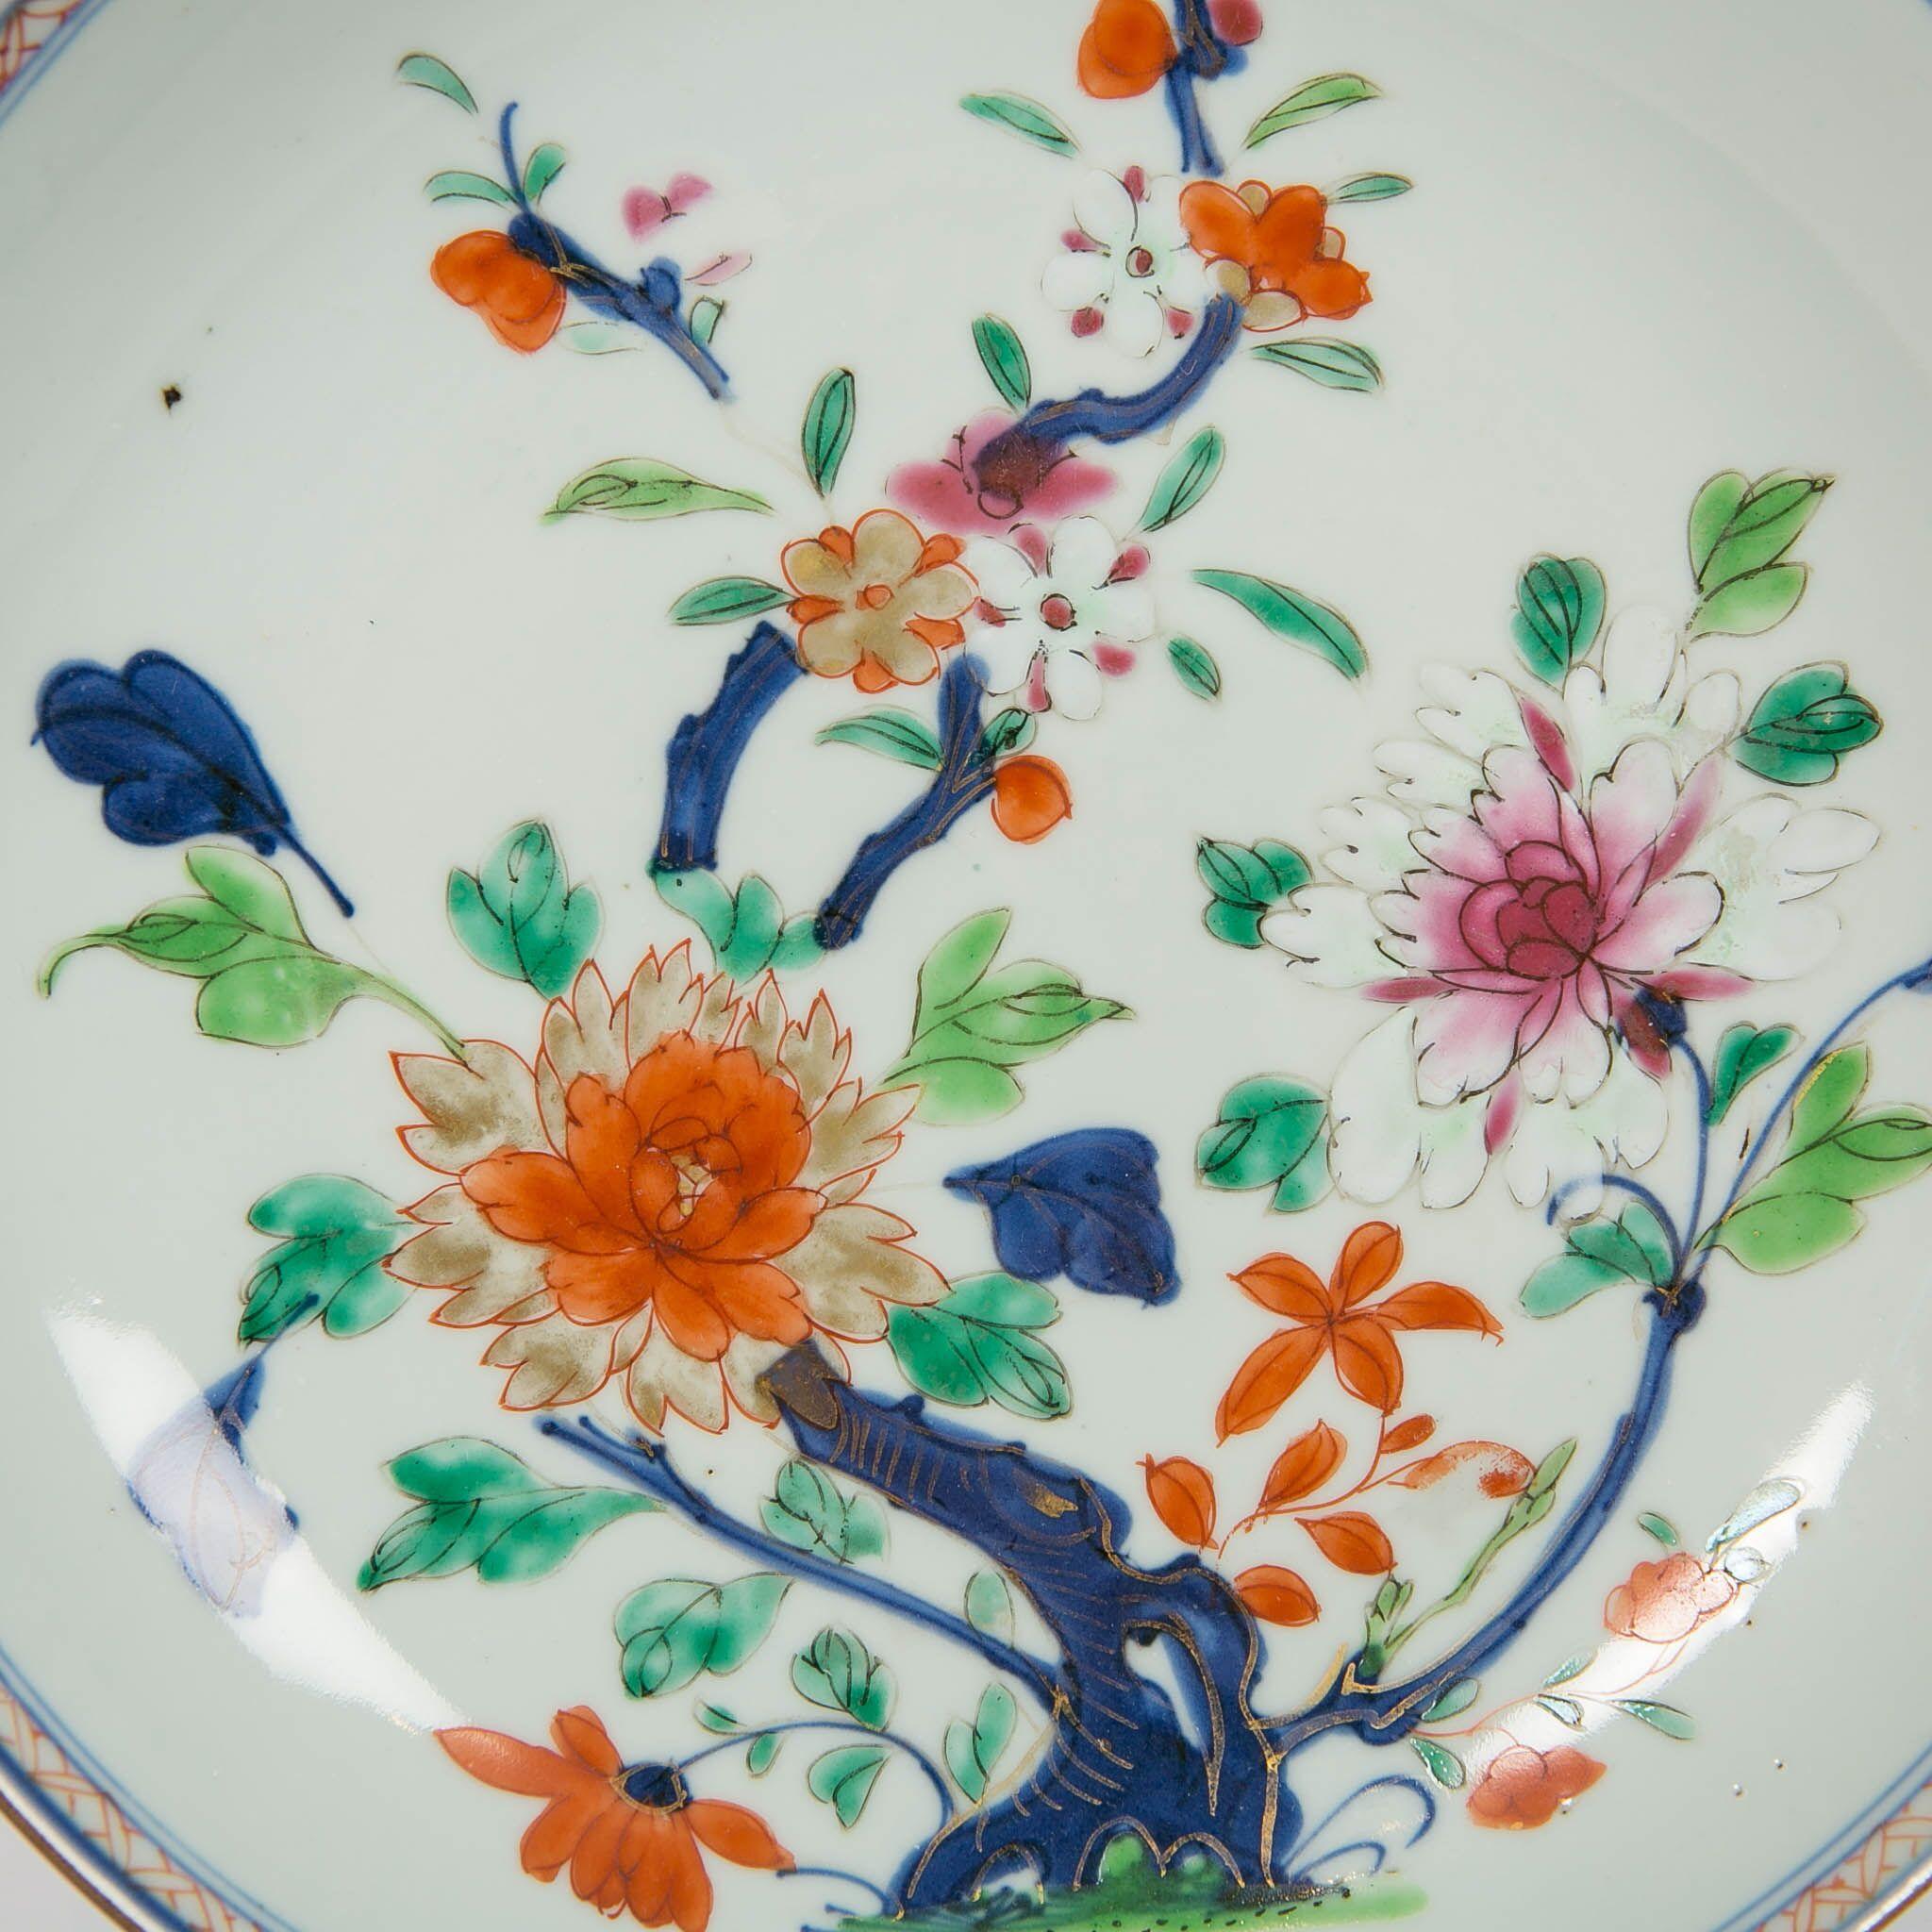 We are pleased to offer this Chinese export dish decorated in the Imari style with peonies budding and in full bloom. In Chinese tradition peonies are known as the king of flowers and symbolize royalty and wealth. This Chinese Imari Porcelain dish